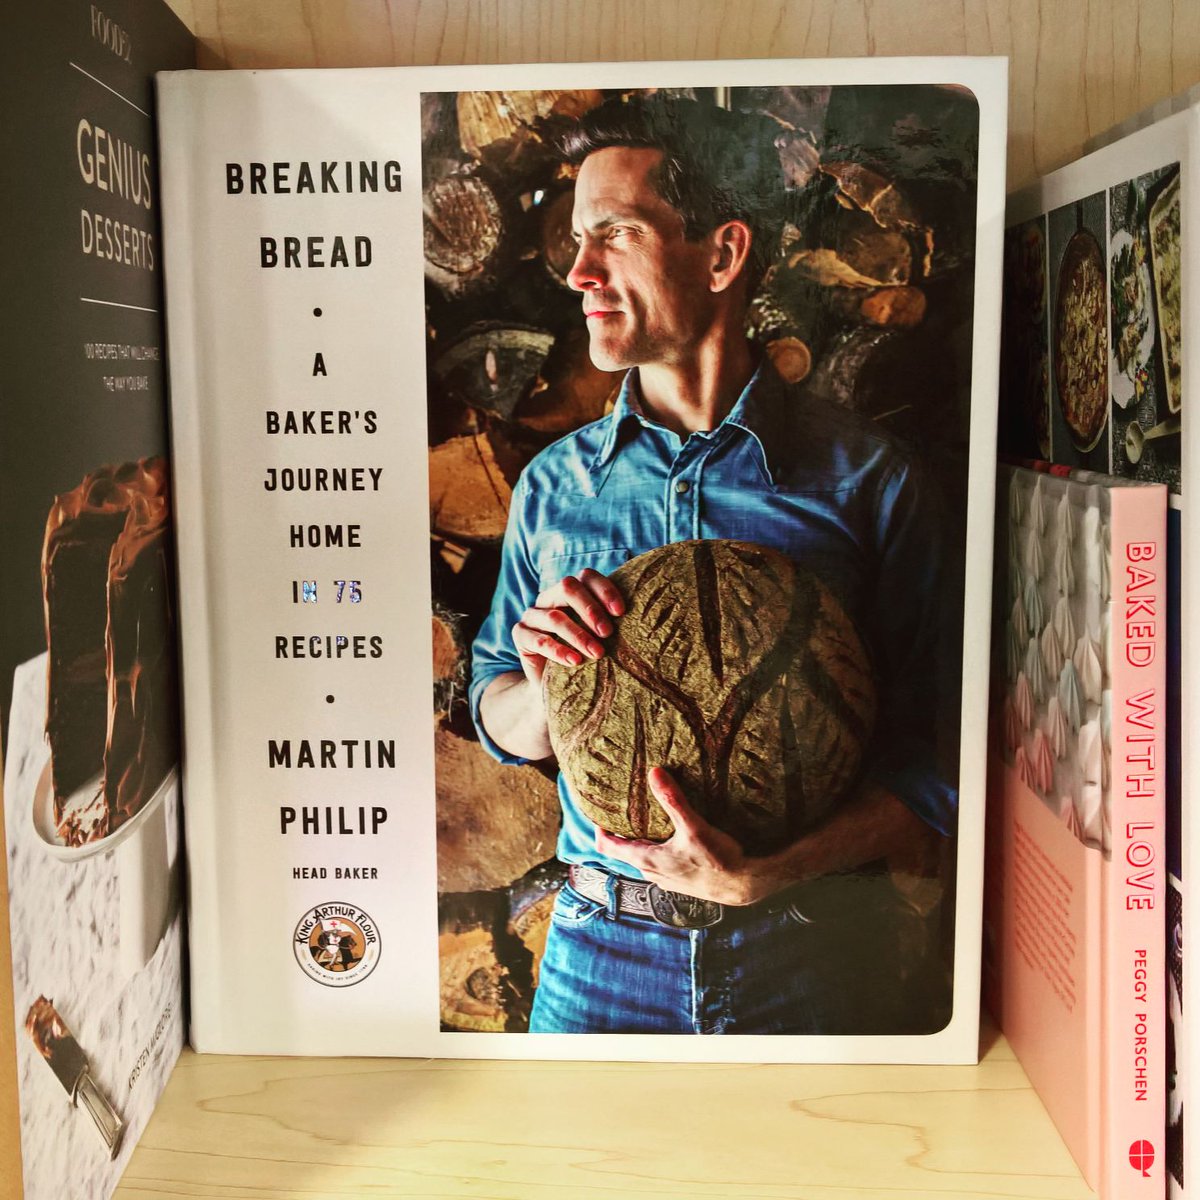 Congrats to Martin Philip, author of the gorgeous cookbook, Breaking Bread, which won the Vermont Book Award last night at the @VCFA . Breaking Bread is food for the soul on so many levels. Bravo, Martin!